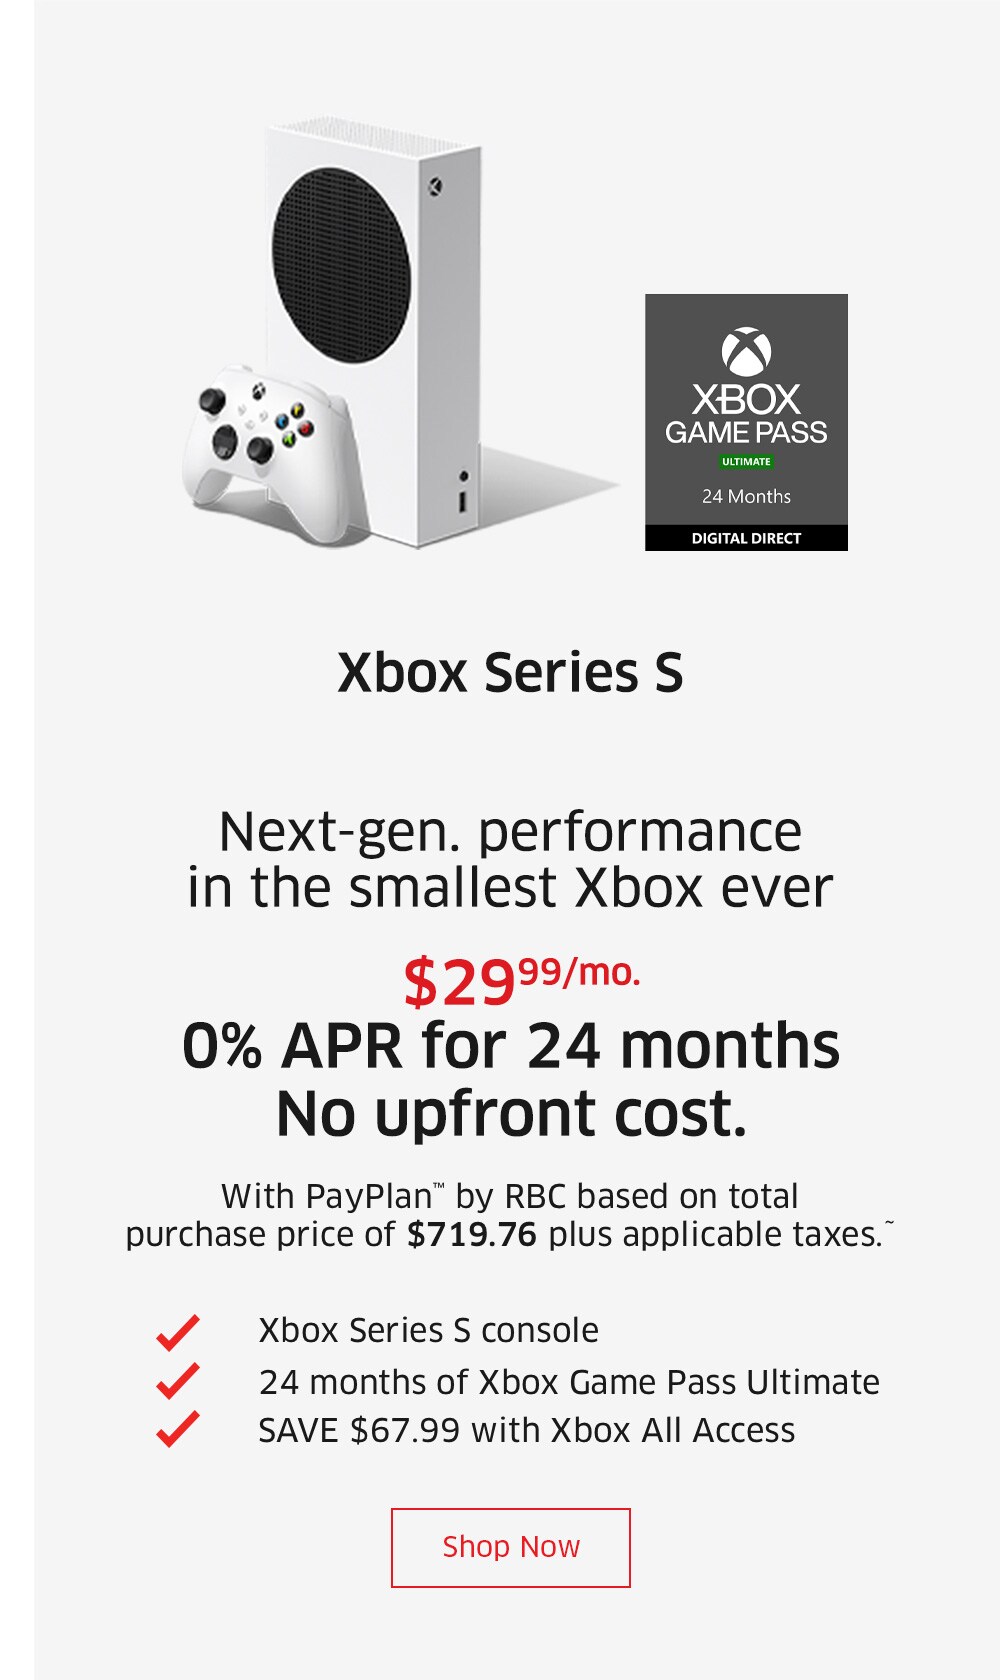 Xbox Series S    $29.99/mo. 0% APR for 24 months No upfront cost. With PayPlan™ by RBC based on total purchase price of $719.96 plus applicable taxes.^  Xbox Series S console 24 months of Xbox Game Pass Ultimate SAVE $60.15 with Xbox All Access  Shop Now